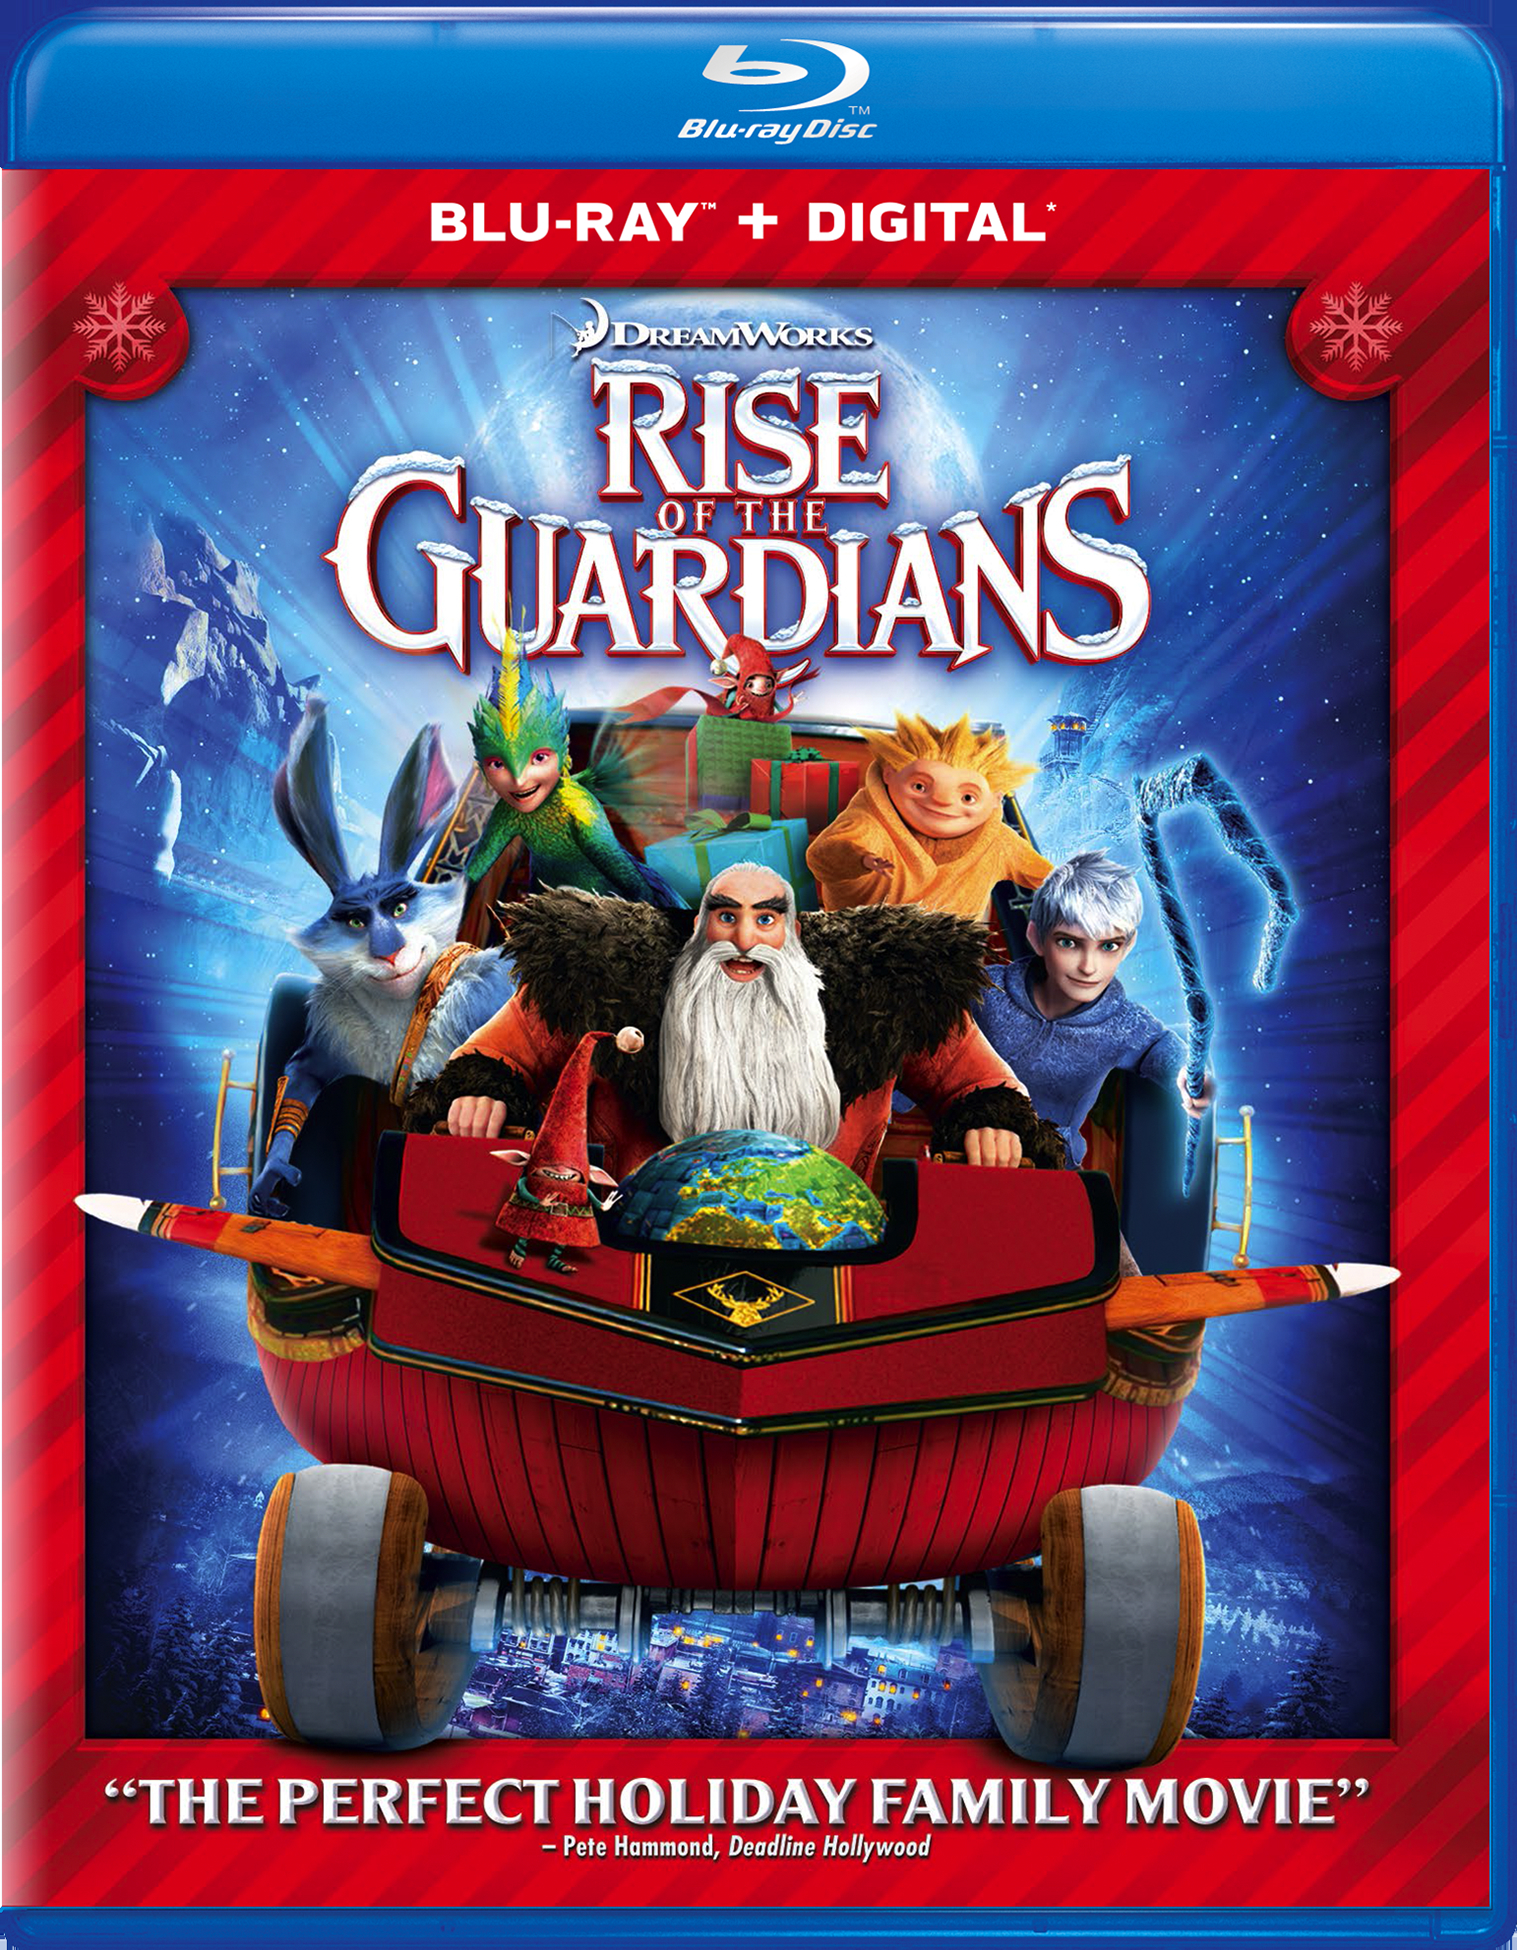 Rise Of The Guardians (Digital + Holiday Art) - Blu-ray [ 2012 ]  - Children Movies On Blu-ray - Movies On GRUV